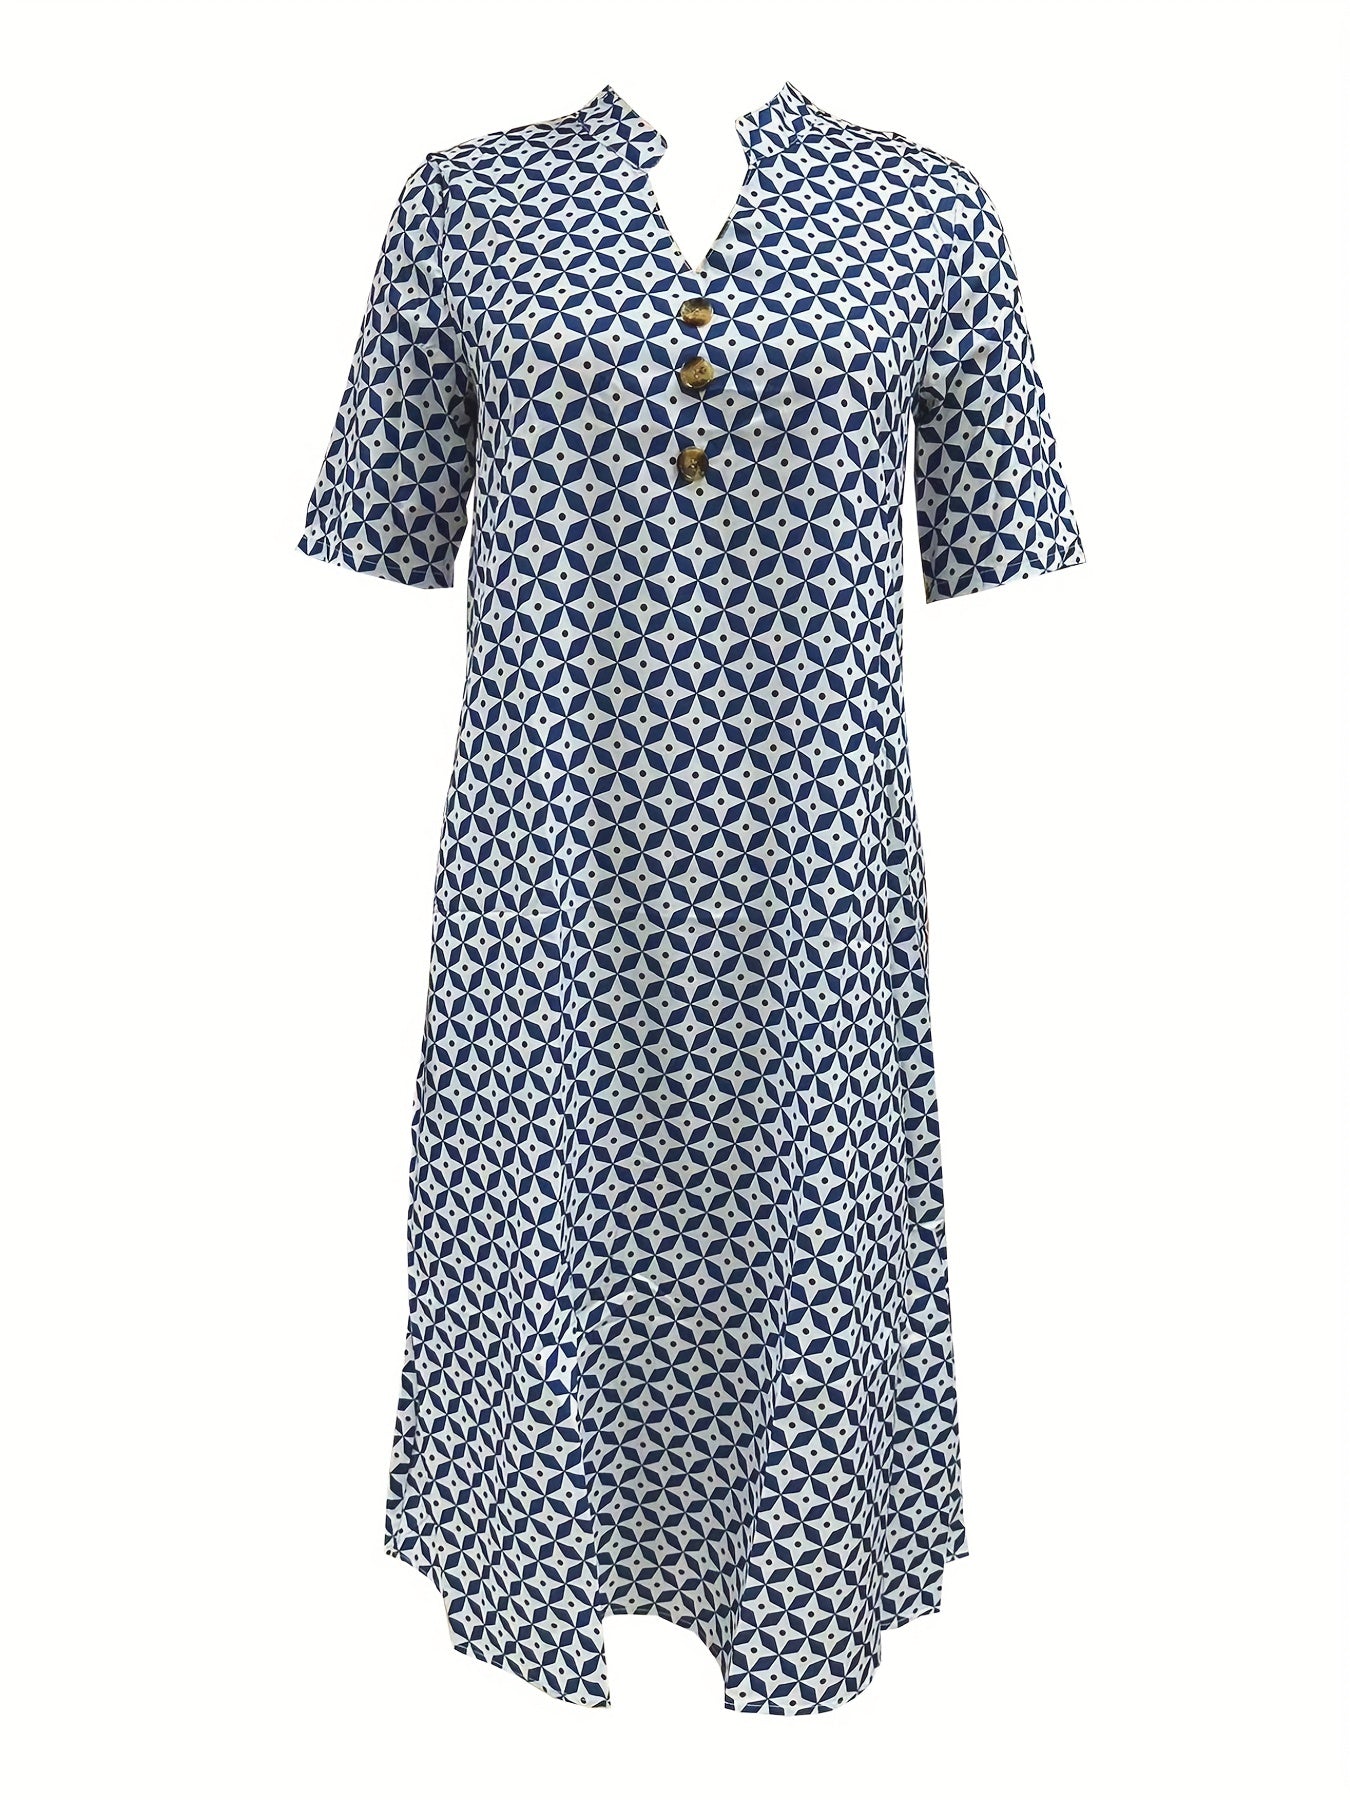 「binfenxie」Allover Print Button Front Dress, Casual Short Sleeve Dress For Spring & Summer, Women's Clothing